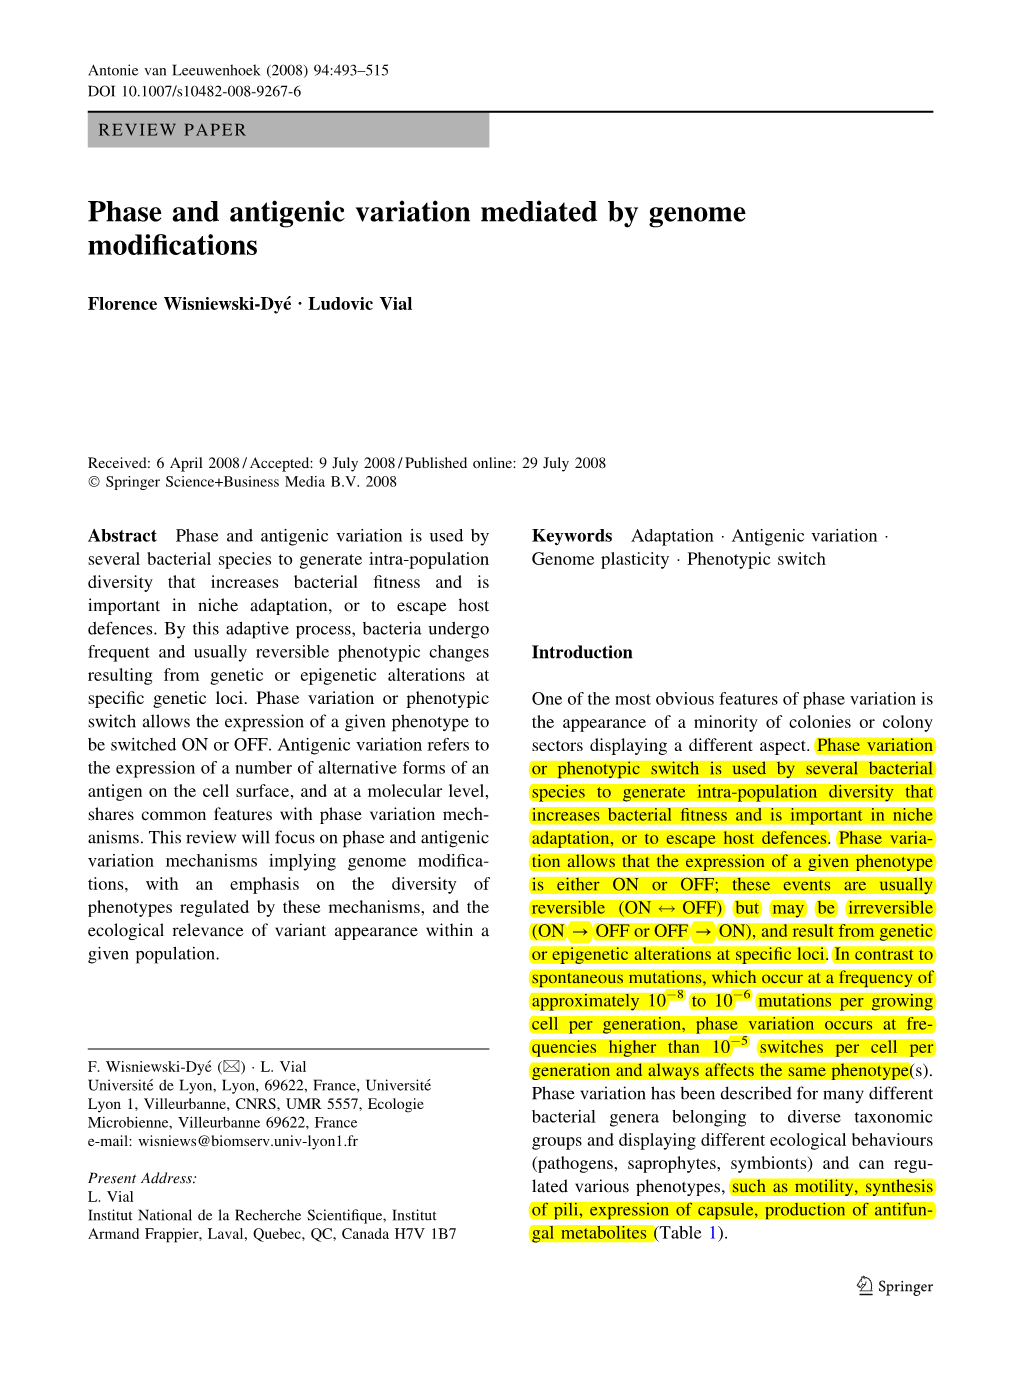 Phase and Antigenic Variation Mediated by Genome Modifications